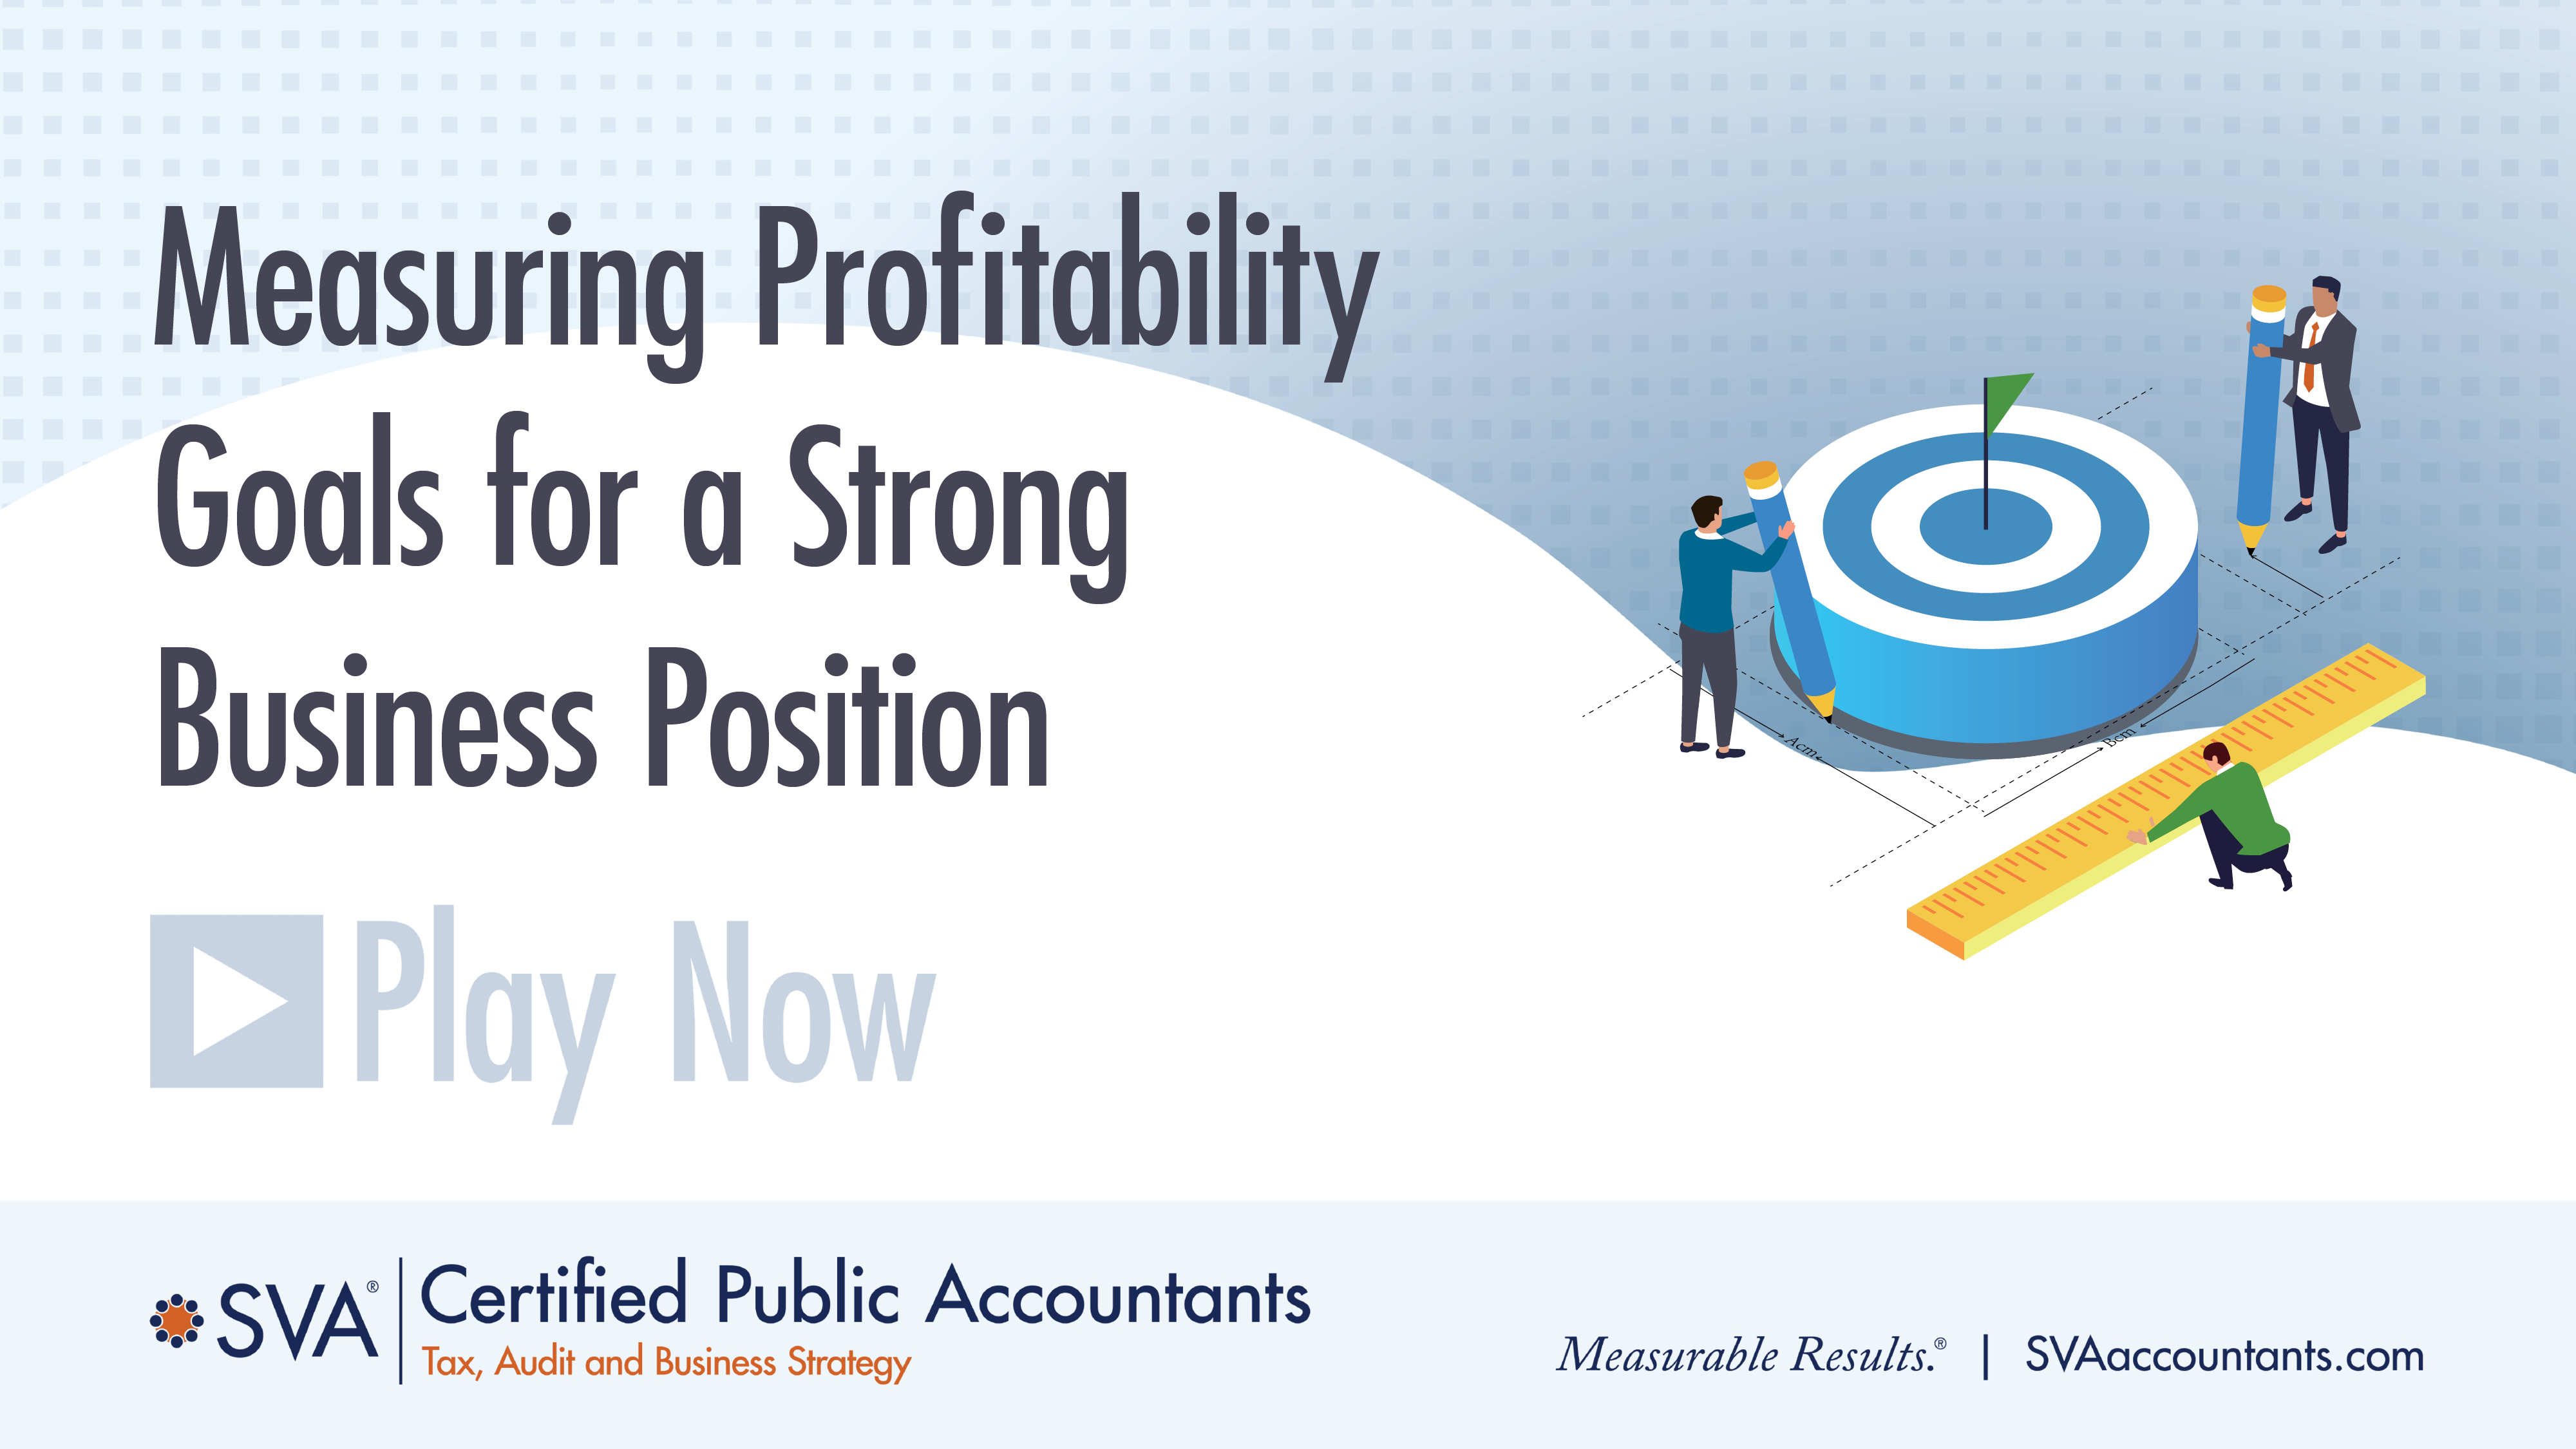 Measuring Profitability Goals for a Strong Business Position